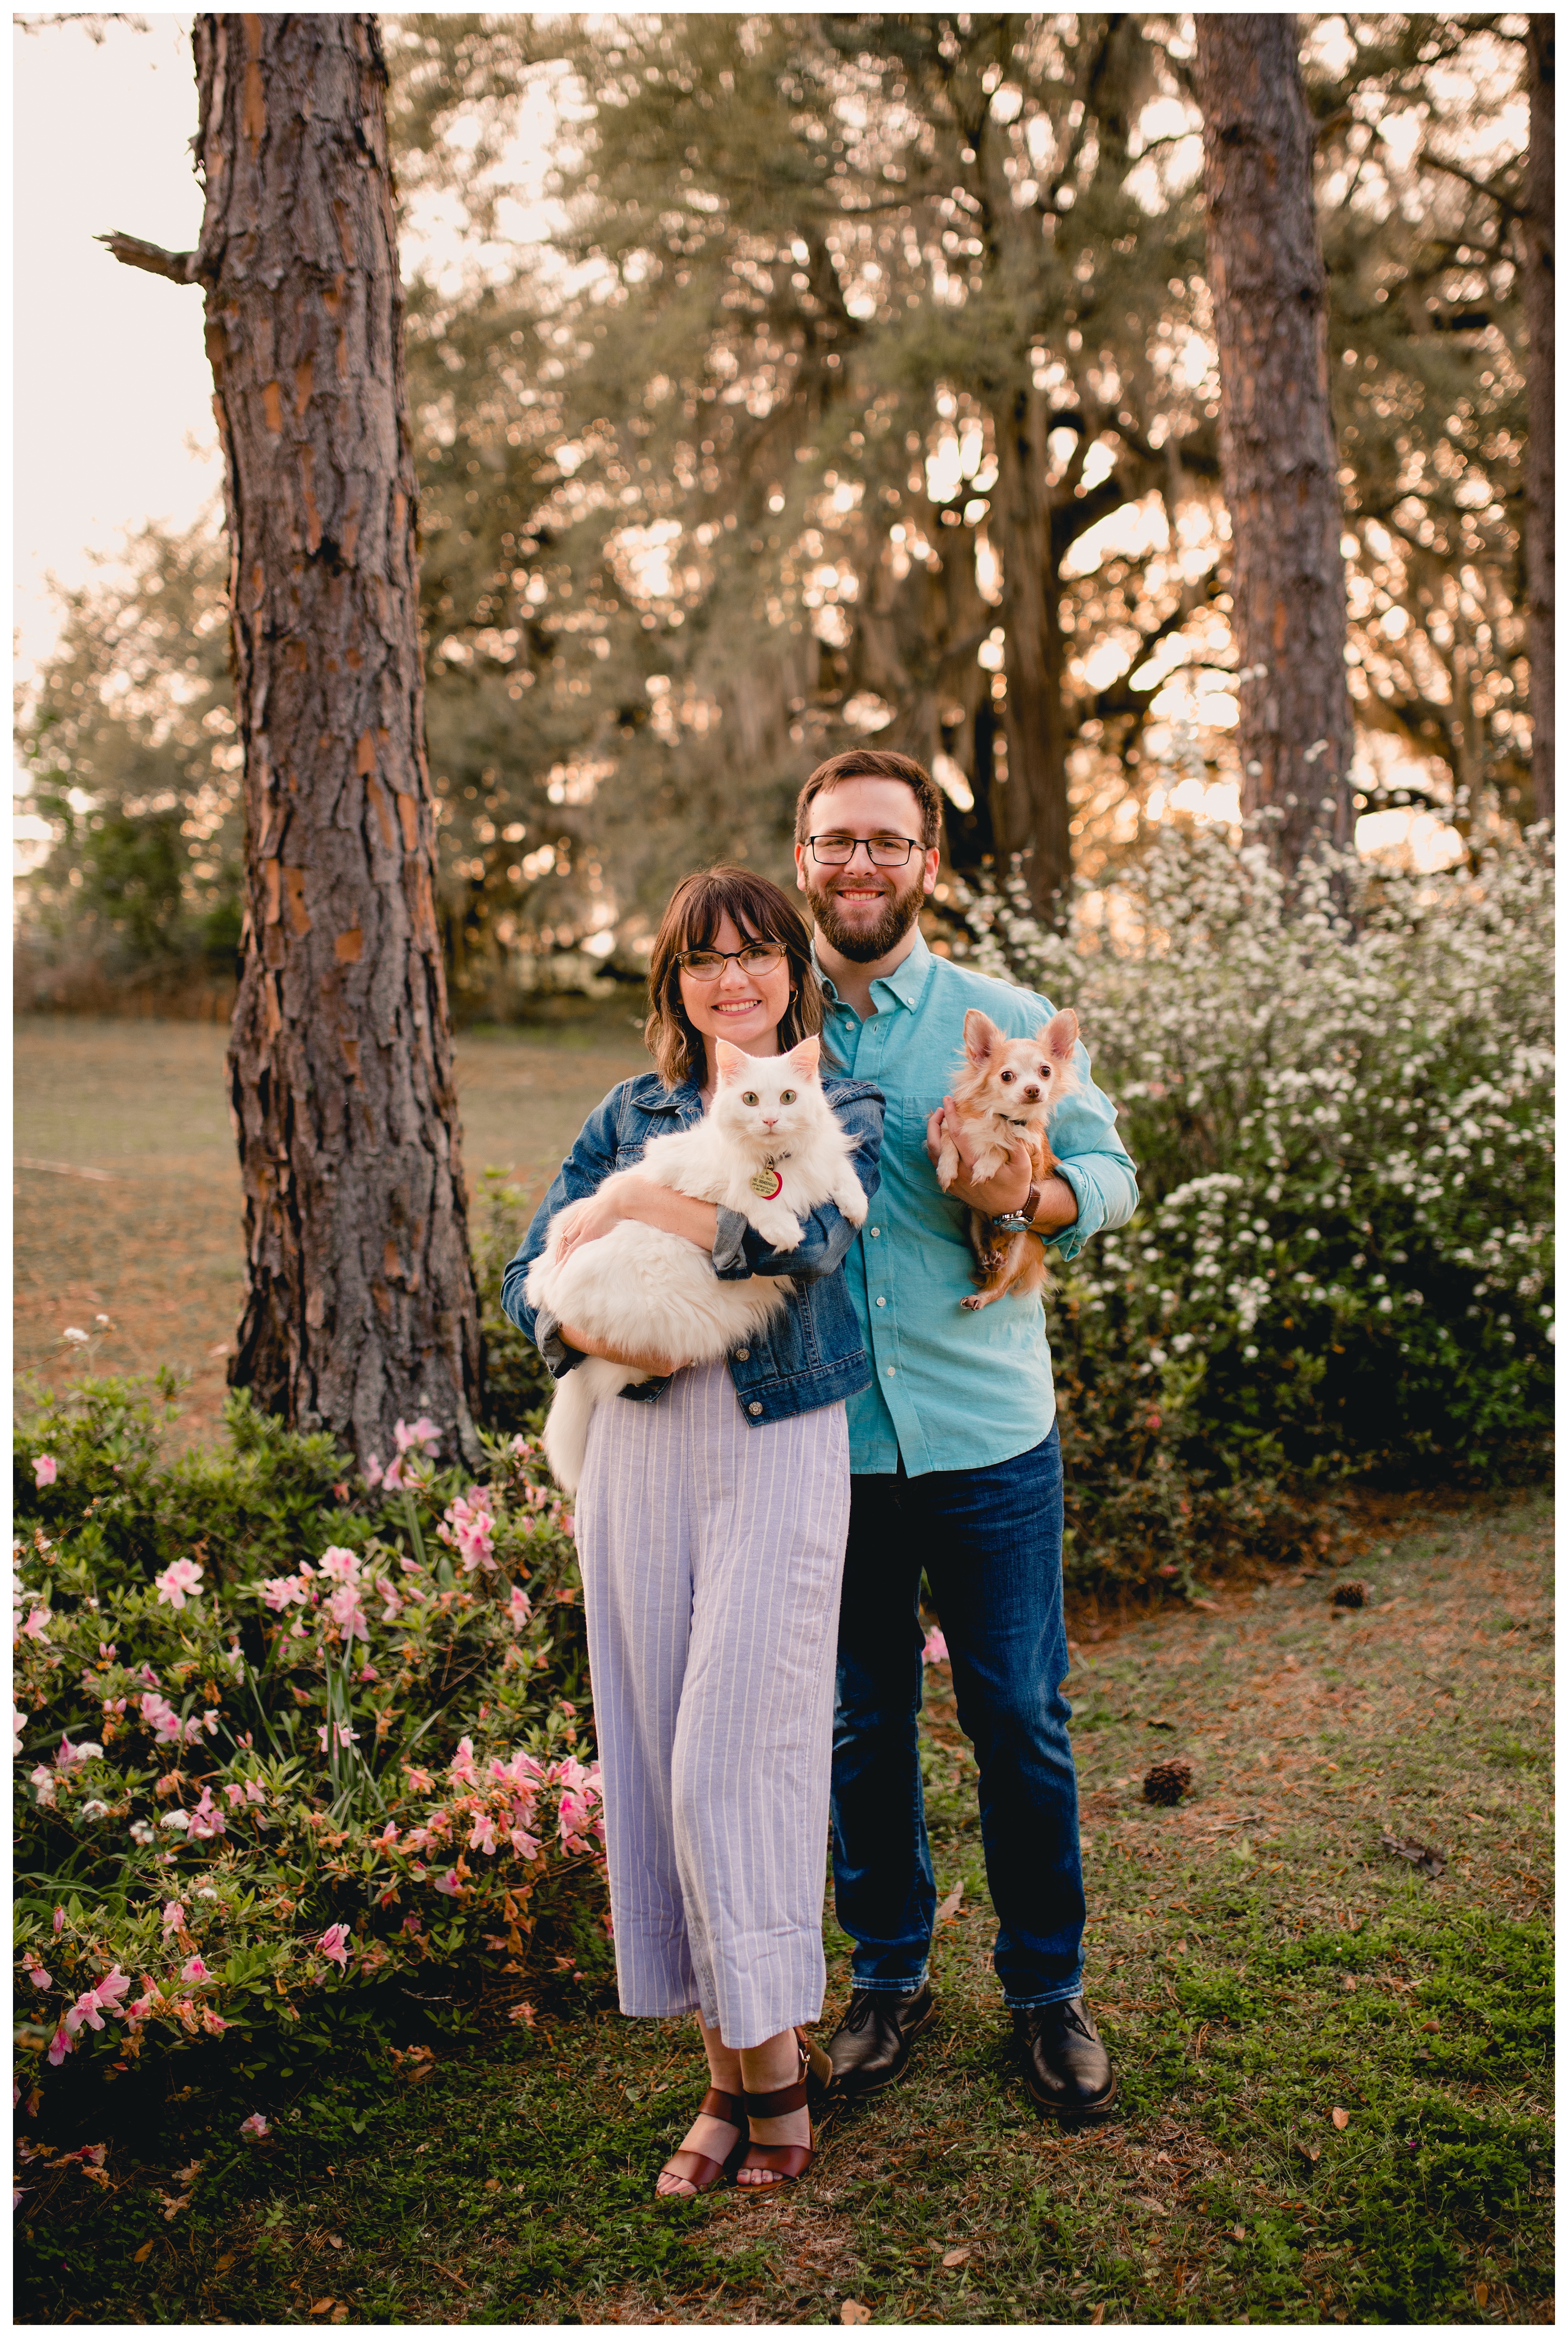 Fun engagement session with fiance's and their cat and dog. Shelly Williams Photography